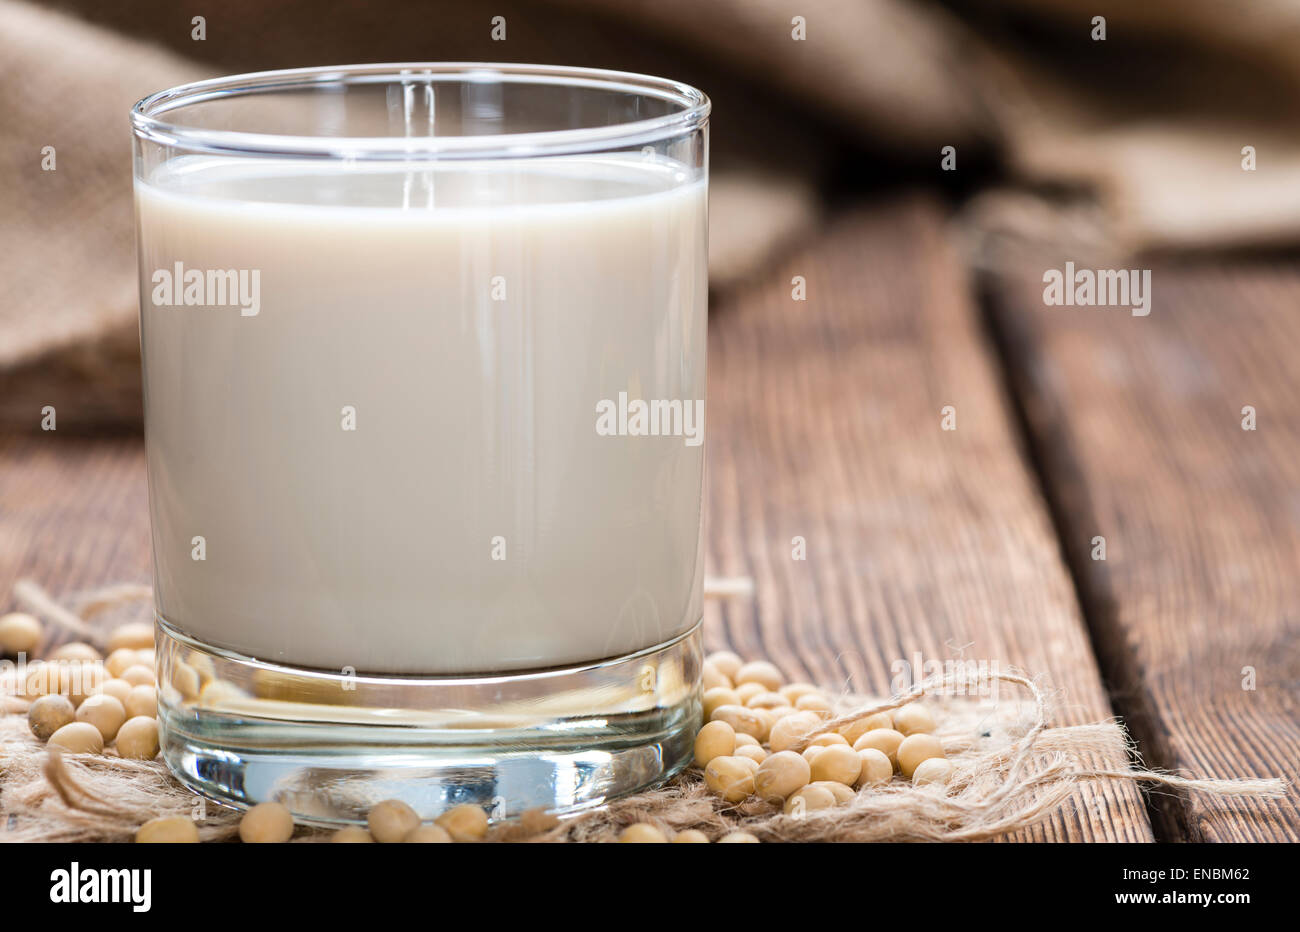 Glass with Soy Milk and Seeds on wooden background Stock Photo